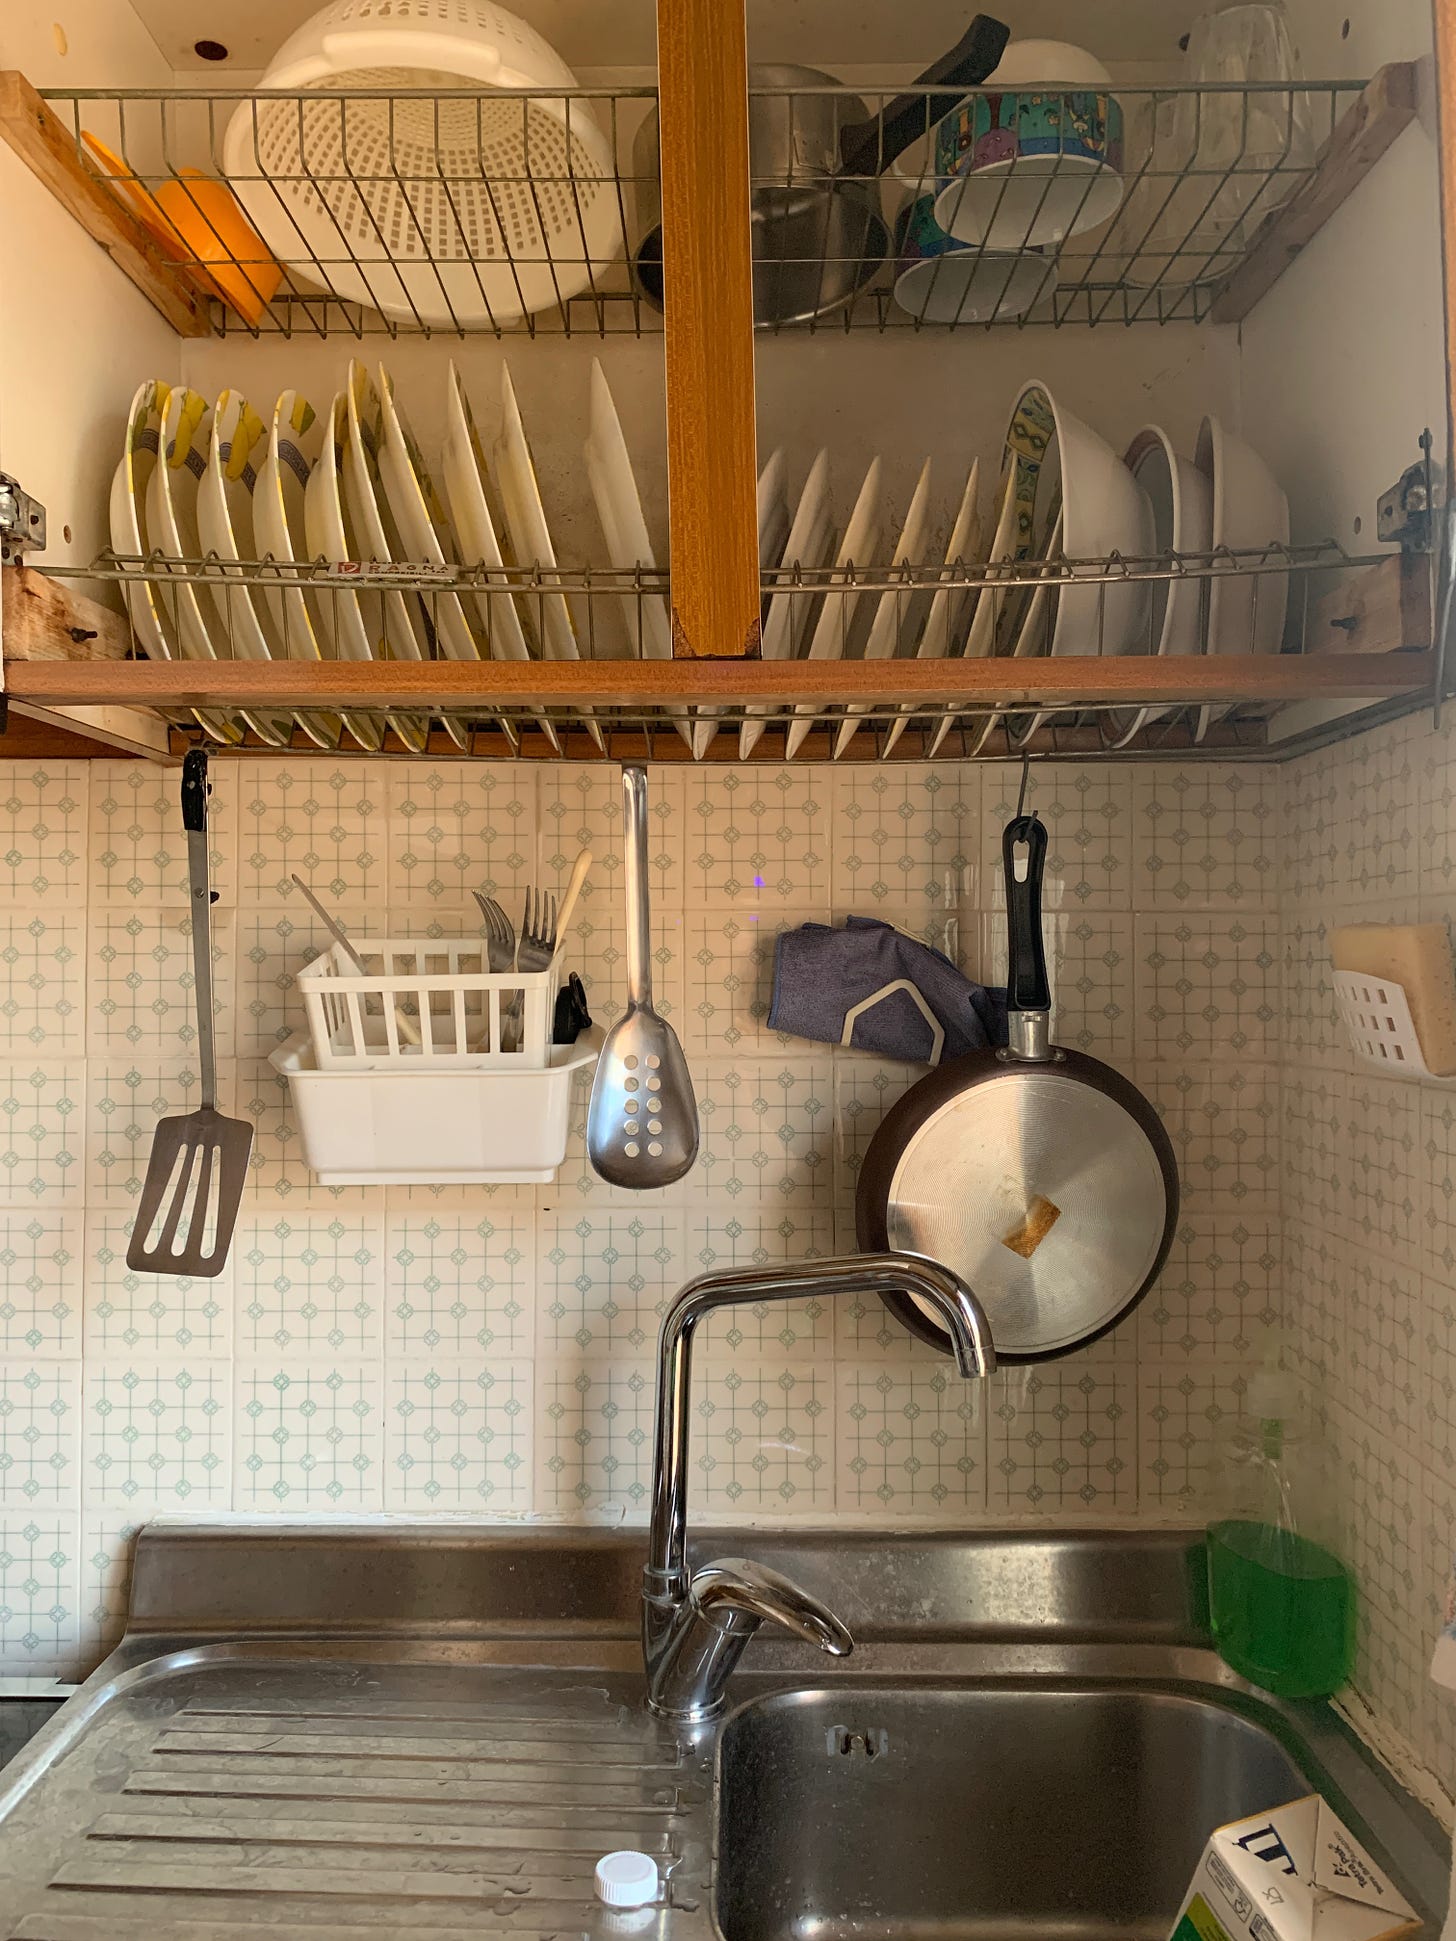 Sicilian kitchen cupboard with the dishes drying in place on racks above the sink. 